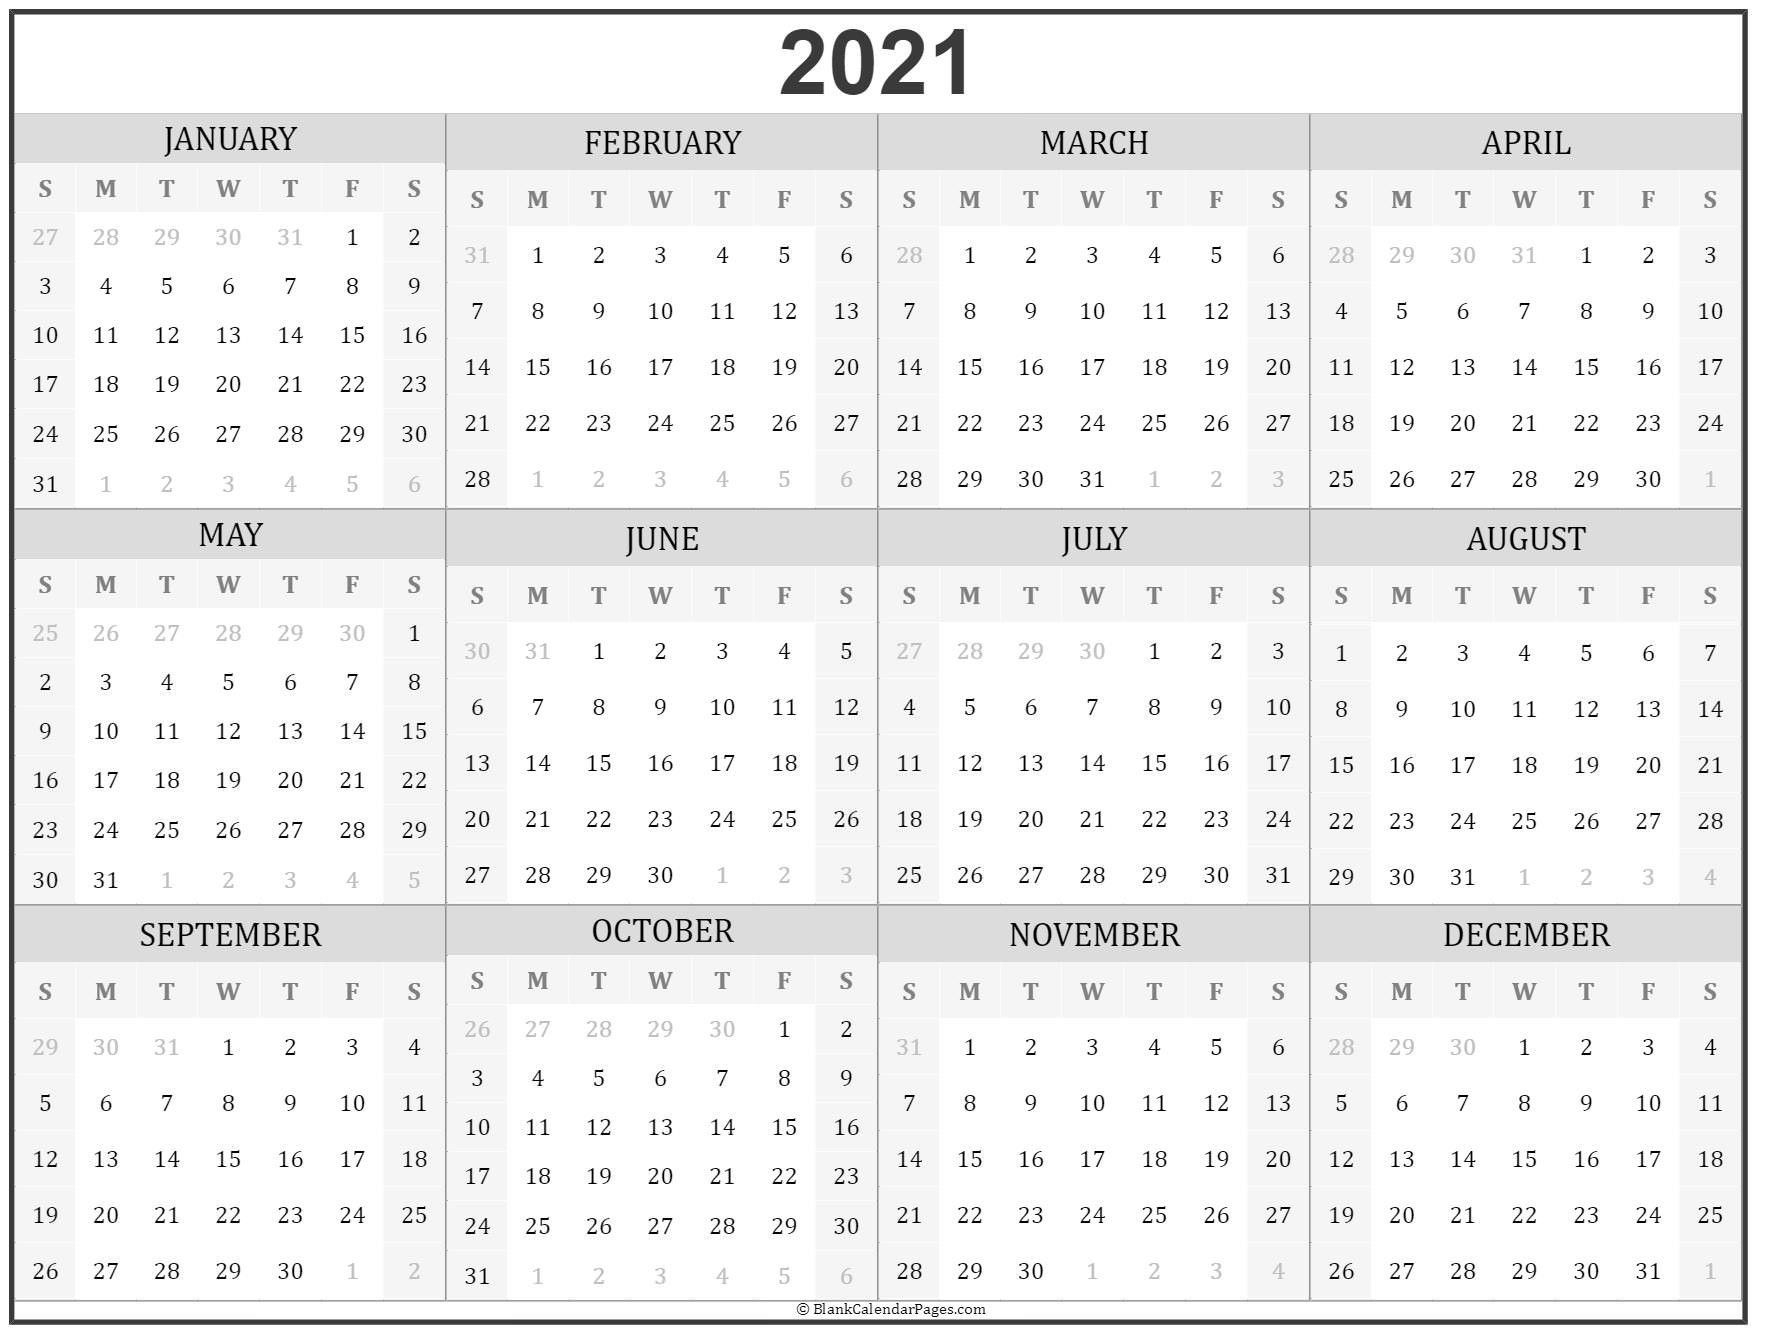 2021 Year Calendar 2021 Year Calendar 2021 Year Calendar-Free Printable Monthly Calendar For Year 2021